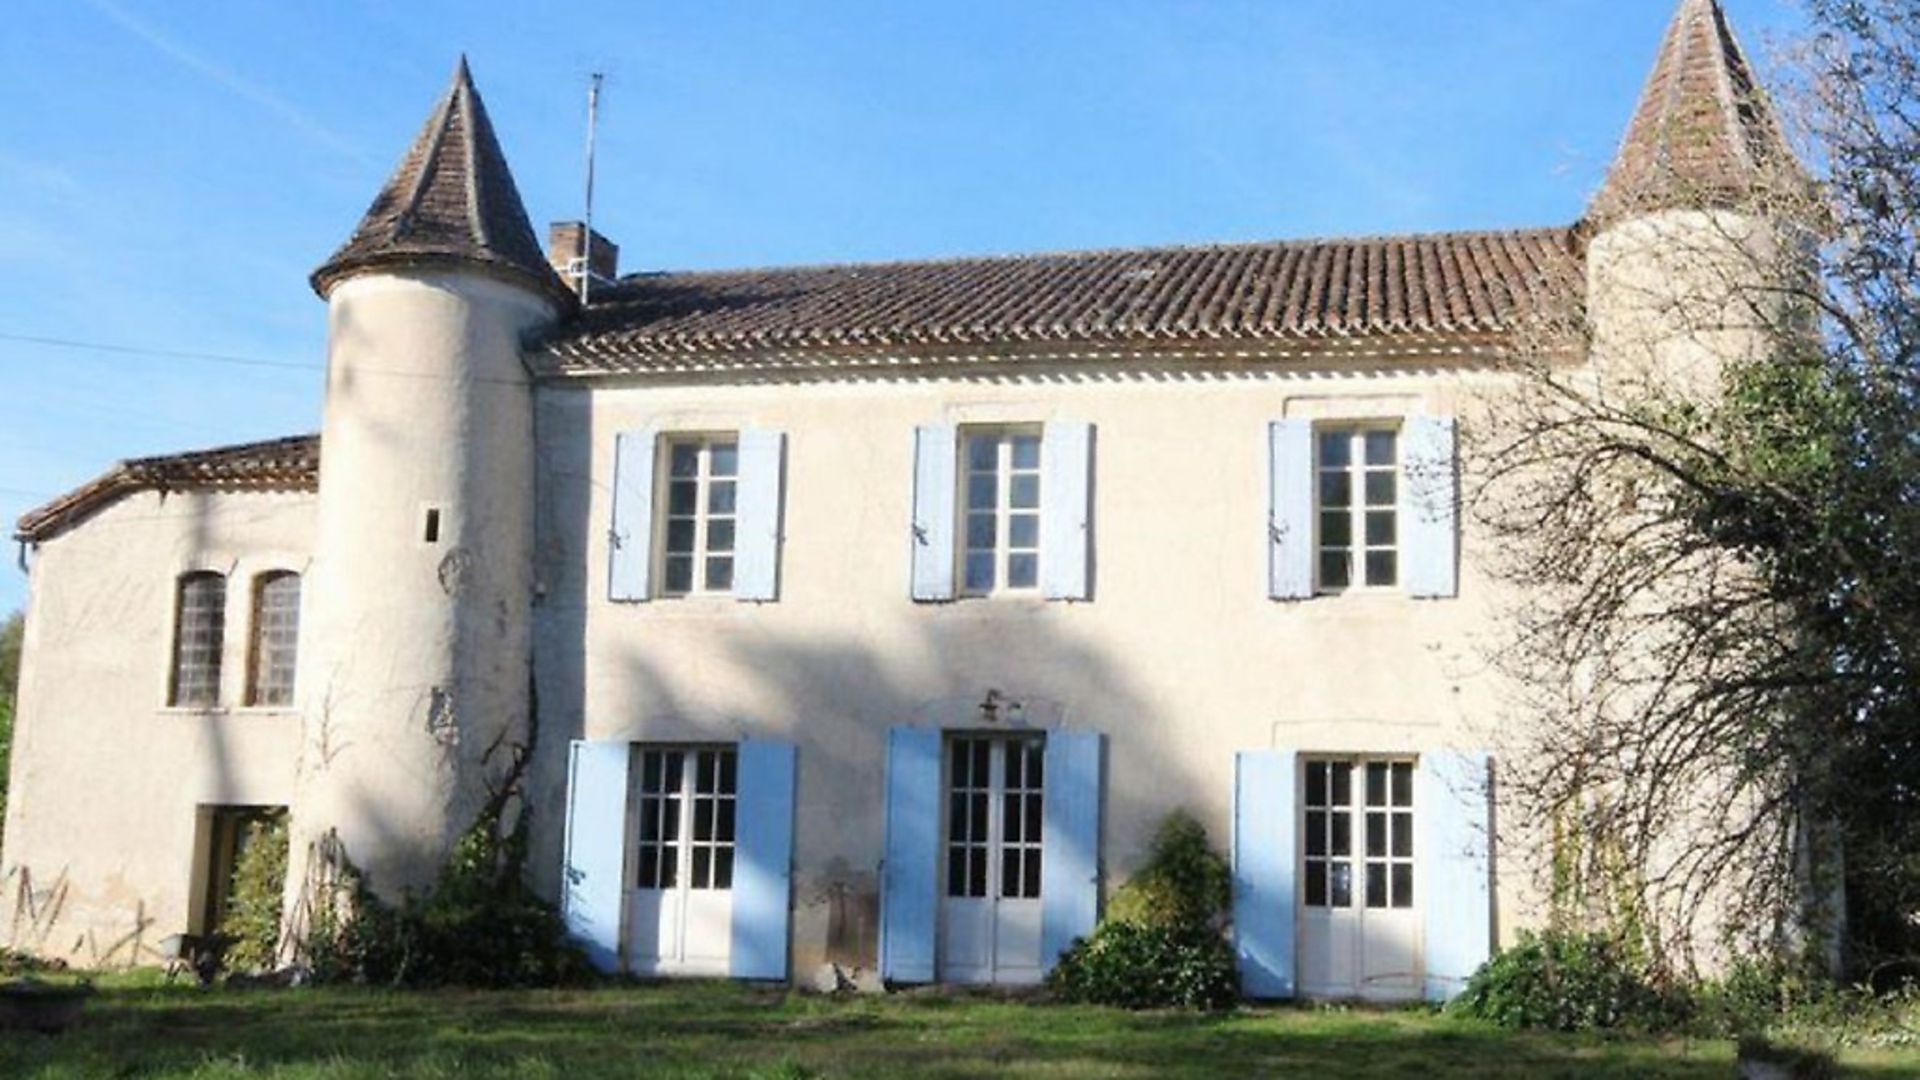 Six super French châteaux for sale for less than €500,000 - Complete France